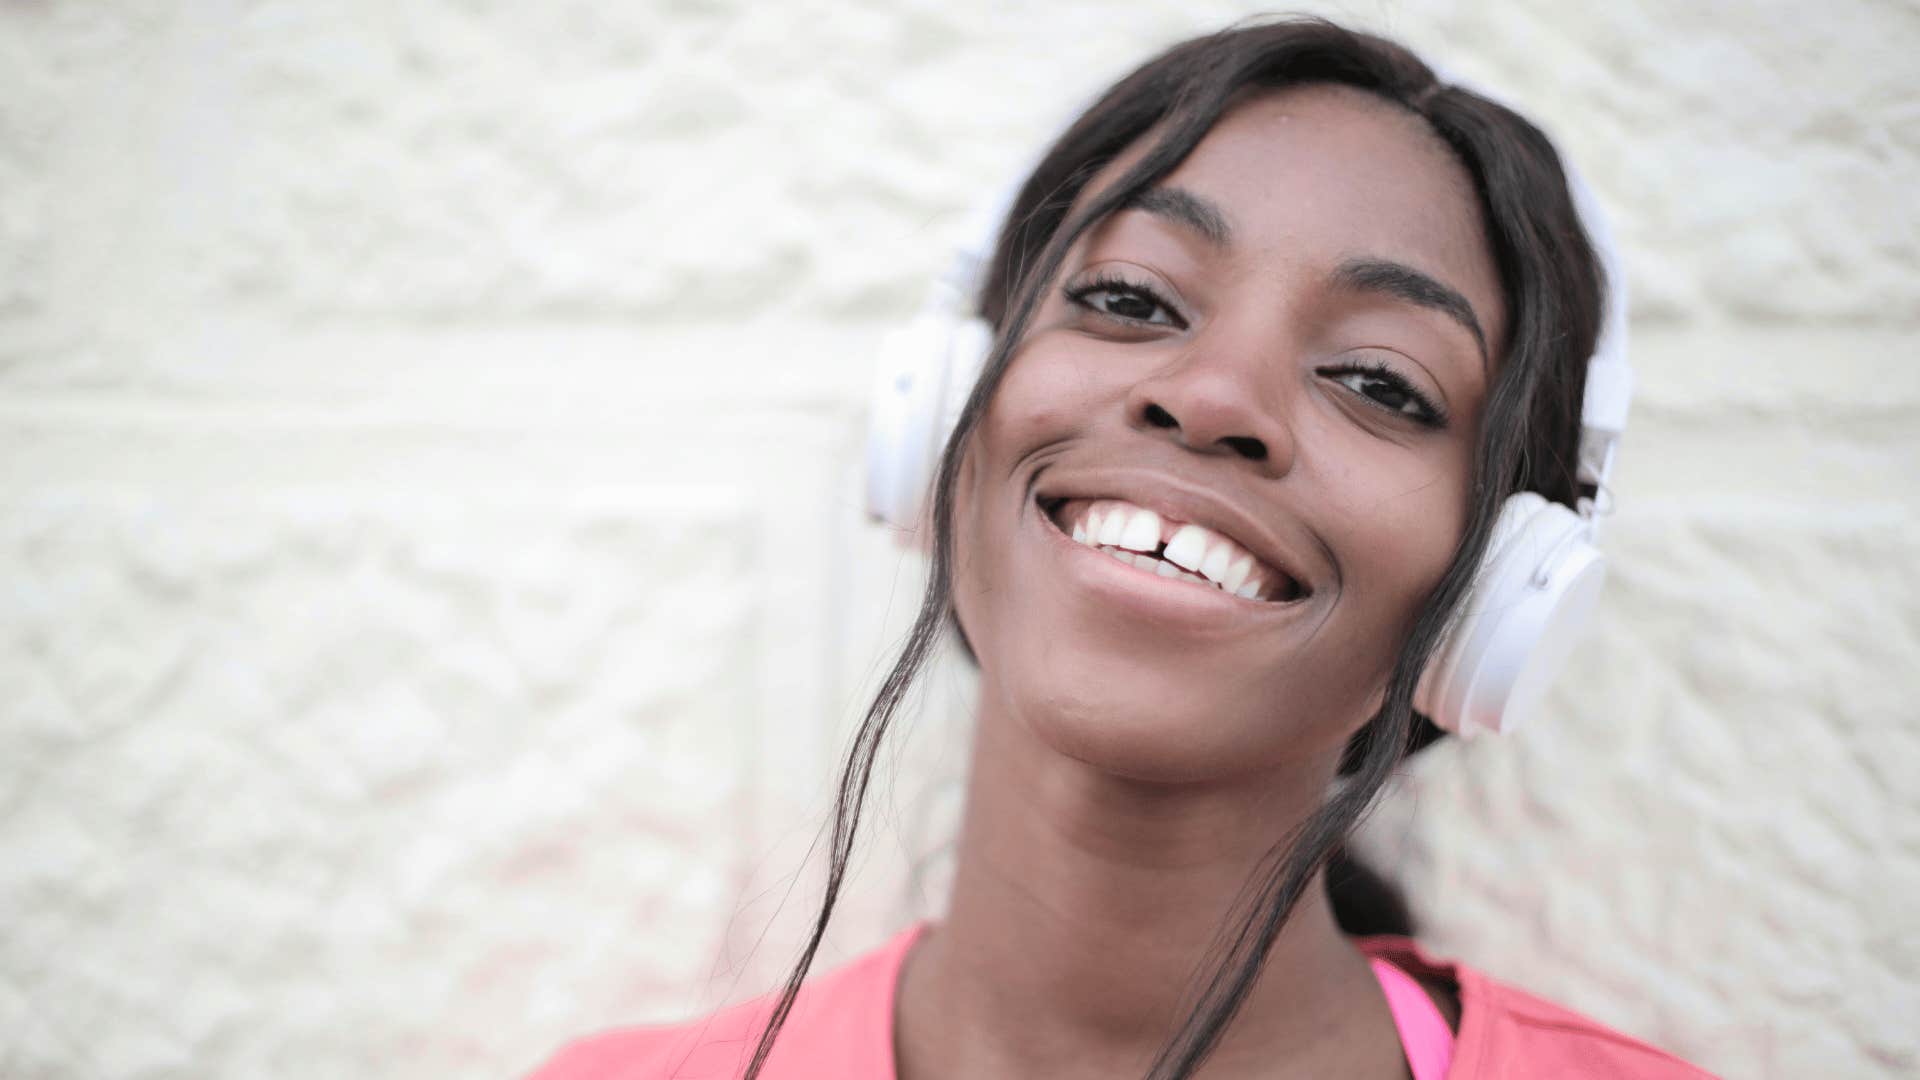 smiling woman with headphones on